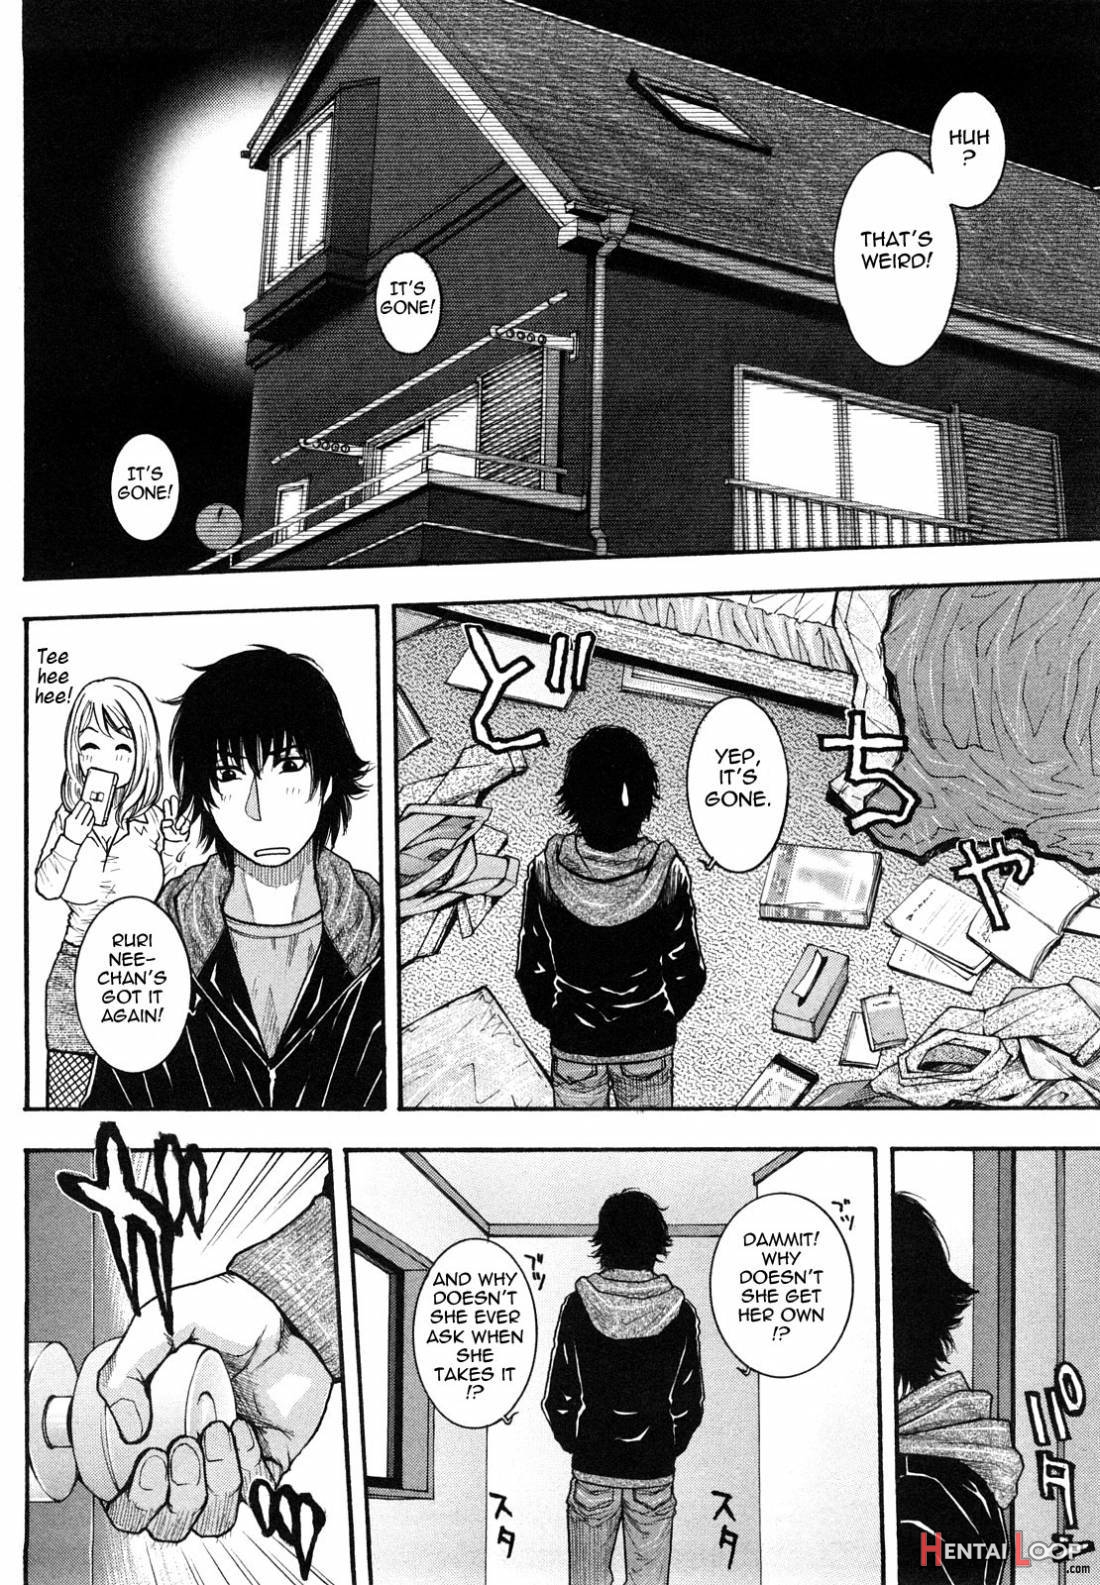 Zutto Onee-chan No Turn!! page 7